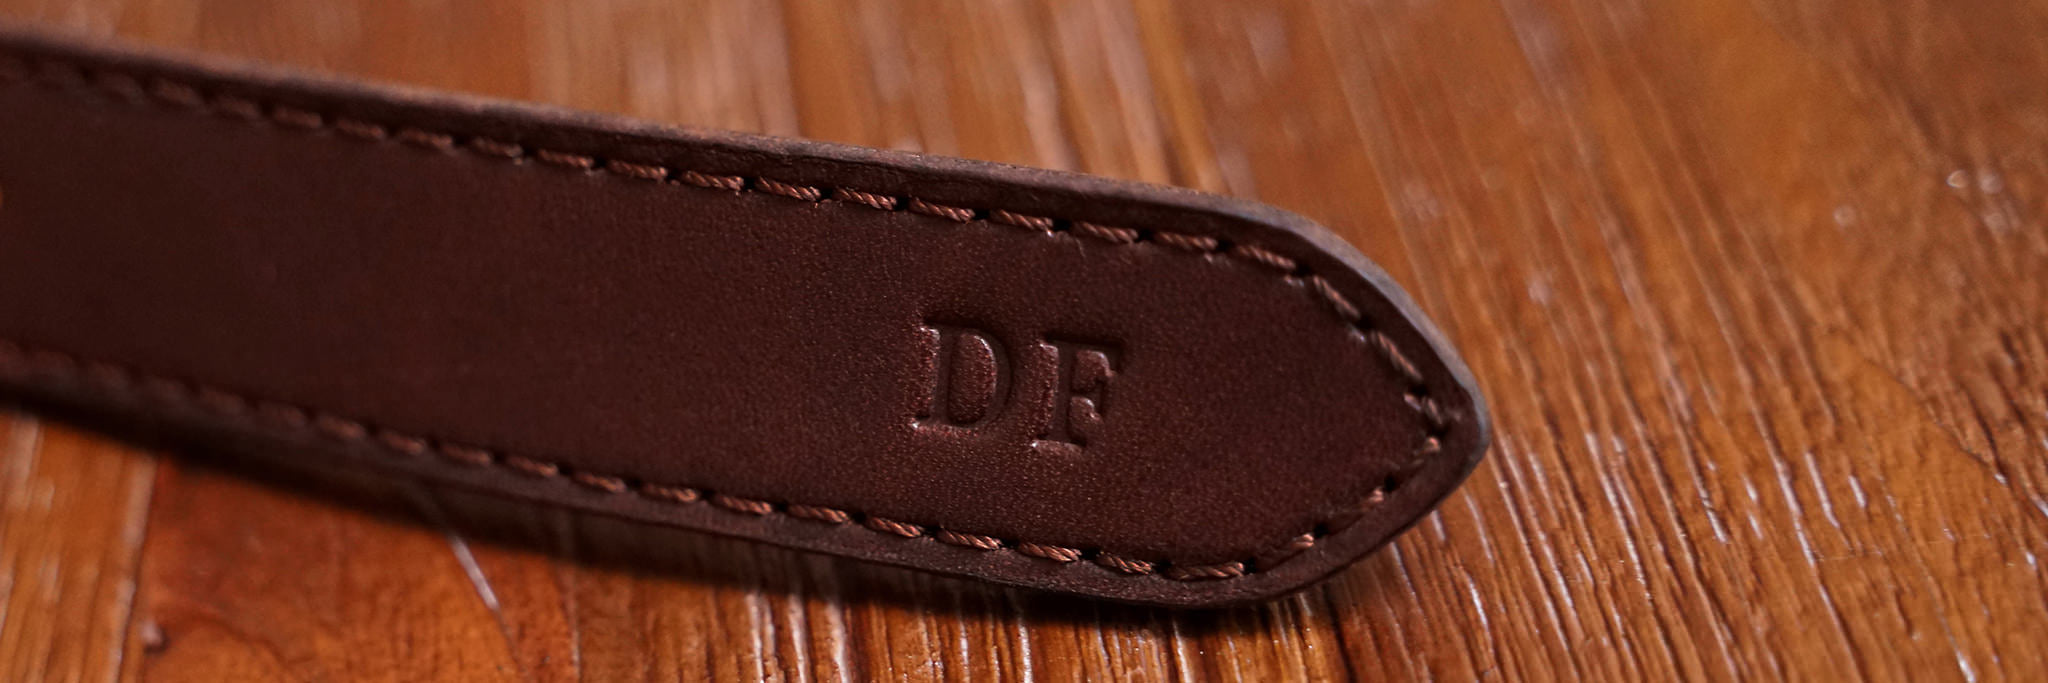 Initials example, shown here on a Fox colored belt with Satyr/Serif font.